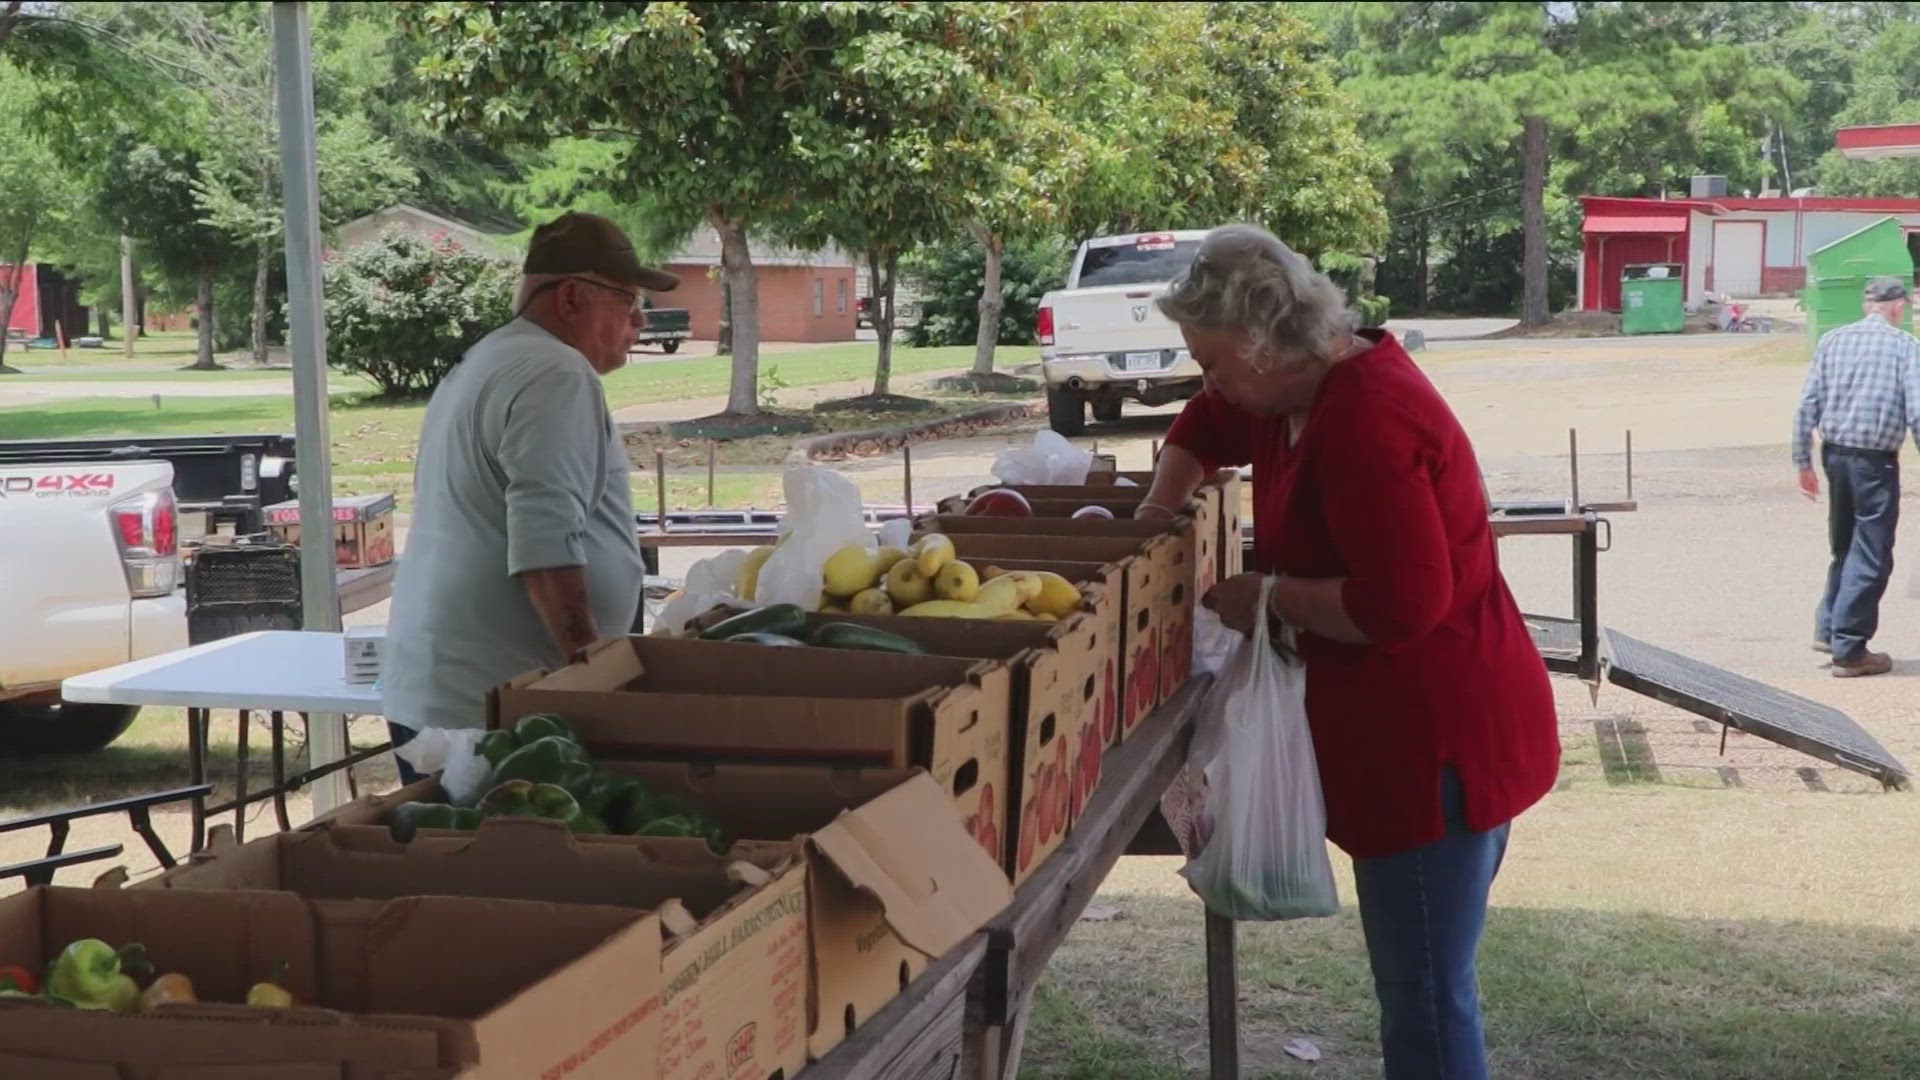 Ronda Best, Dallas County extension agent with the University of Arkansas, knew immediately that without the Mad Butcher, people needed fresh items.